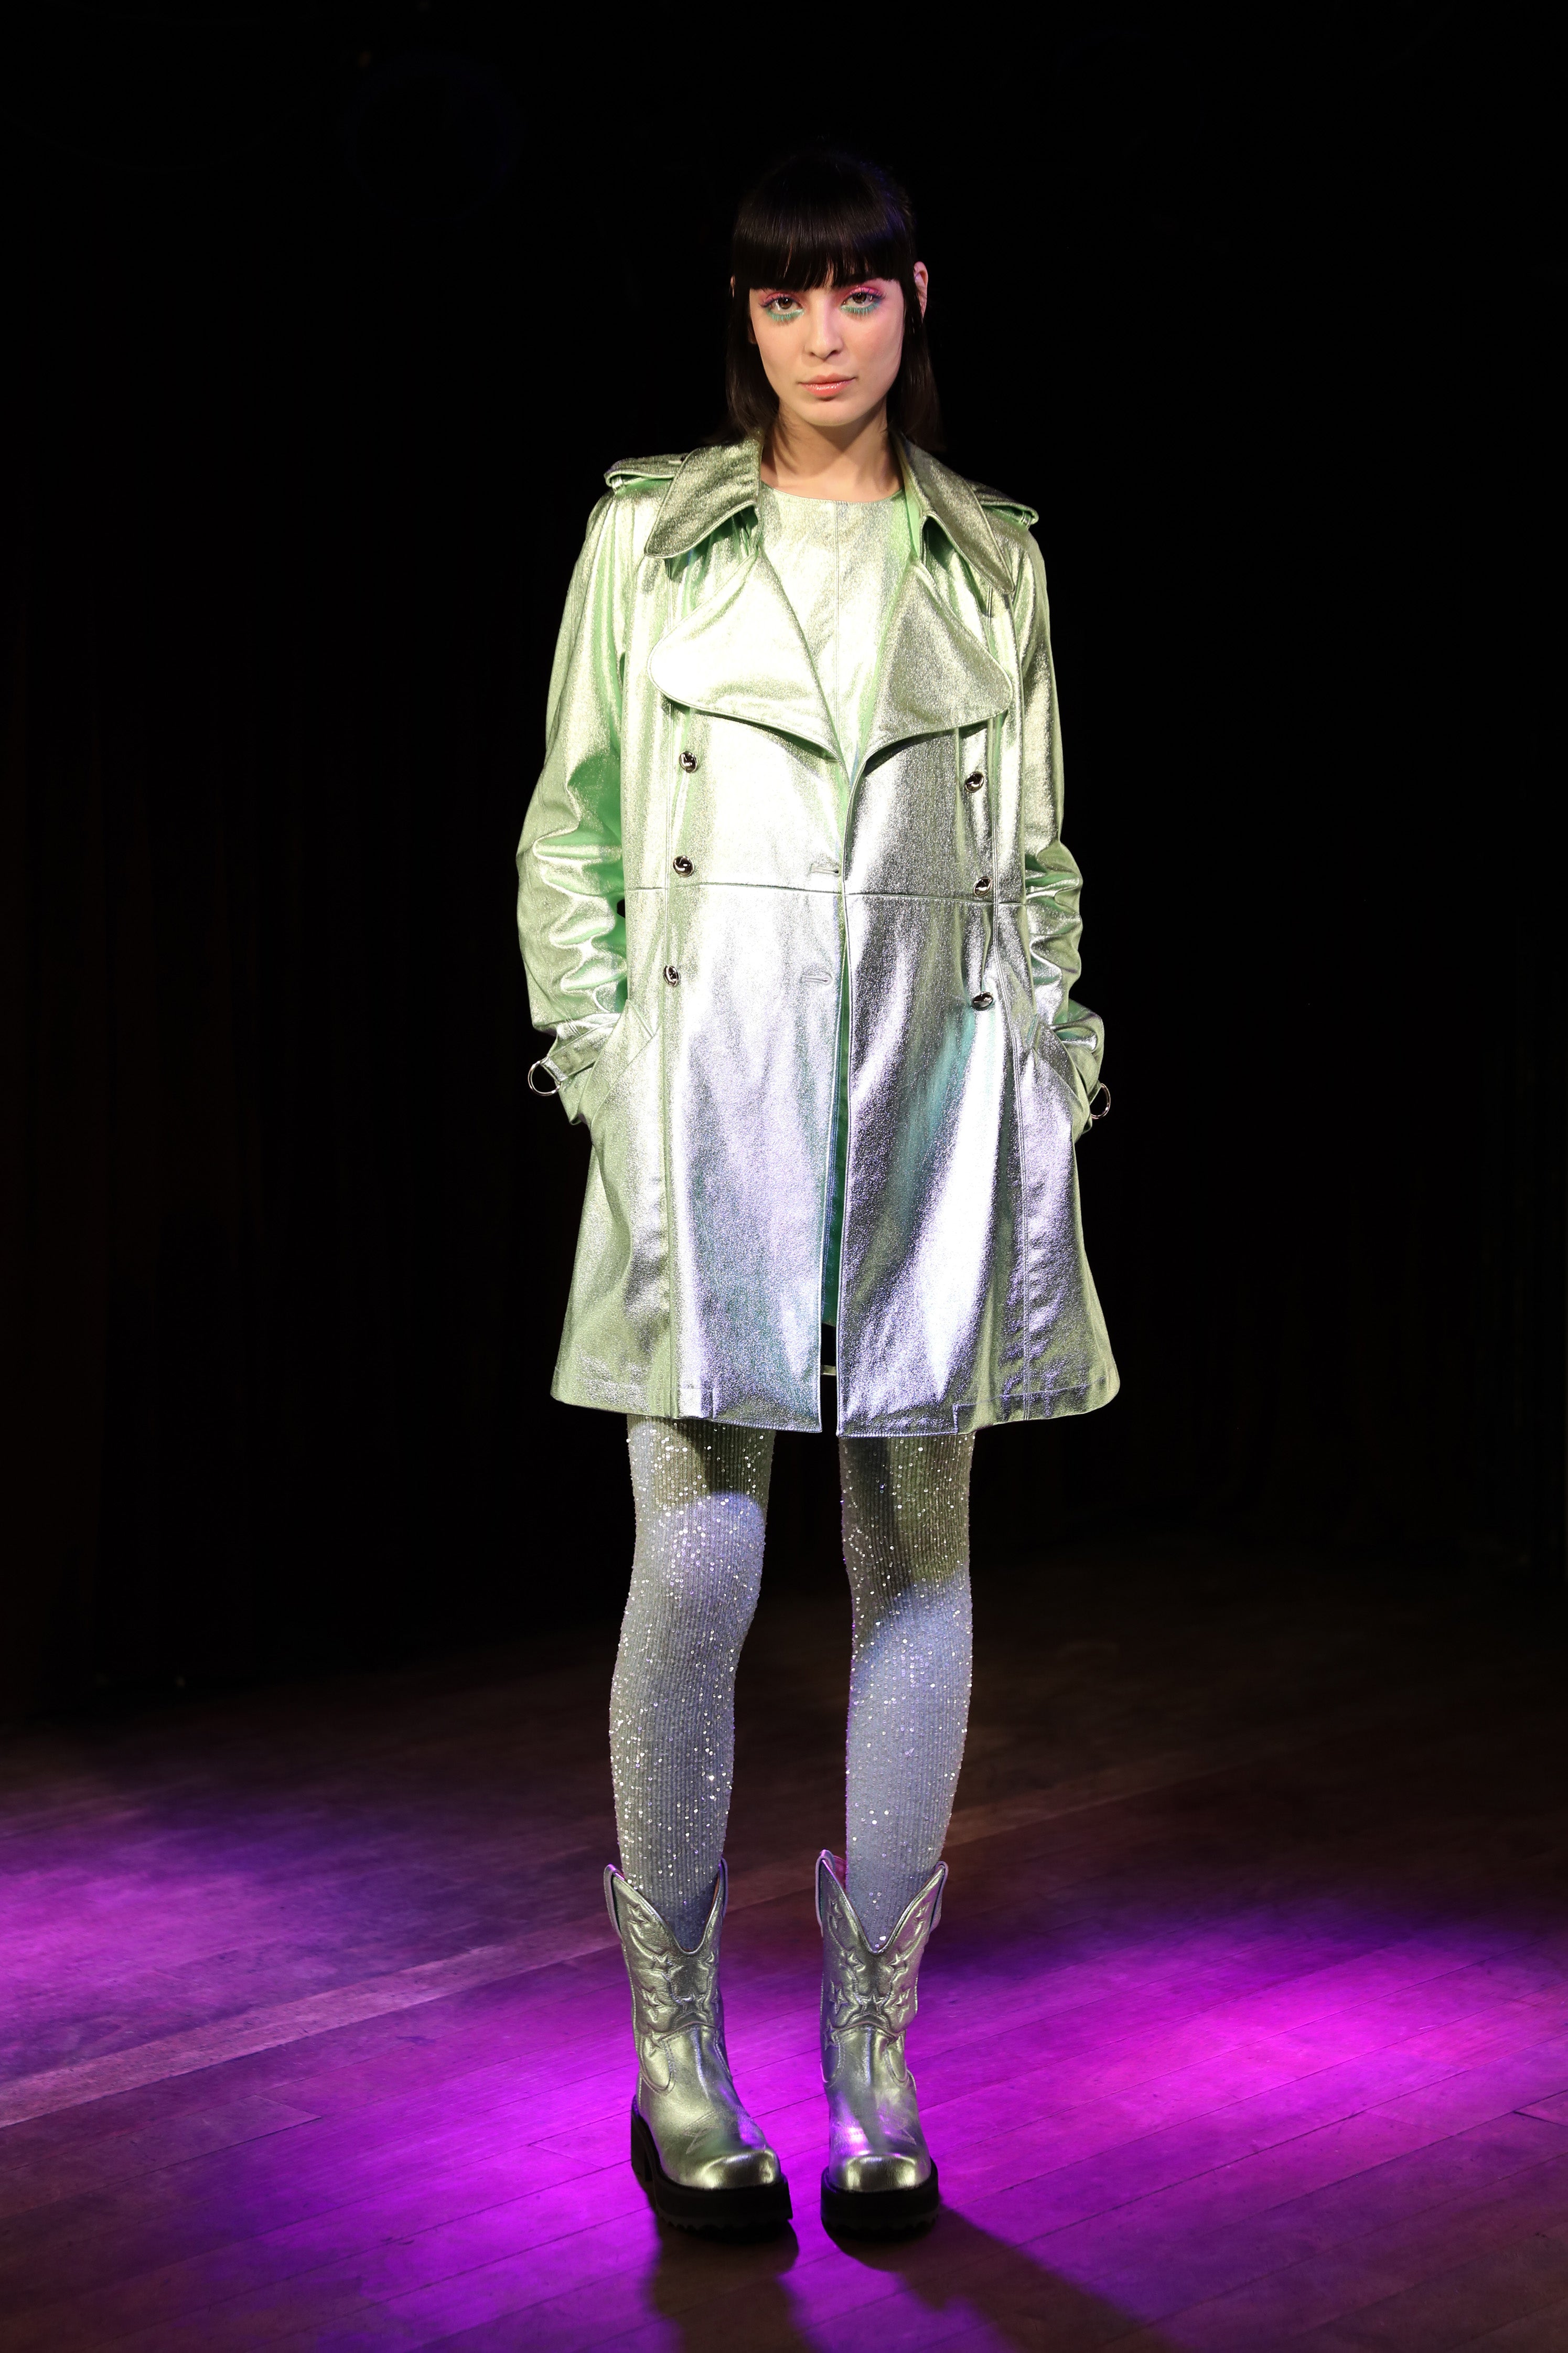 Runway style for this Peppermint Metallic Coat is a mid-length coat with a large collar and long sleeves with buckle cuffs